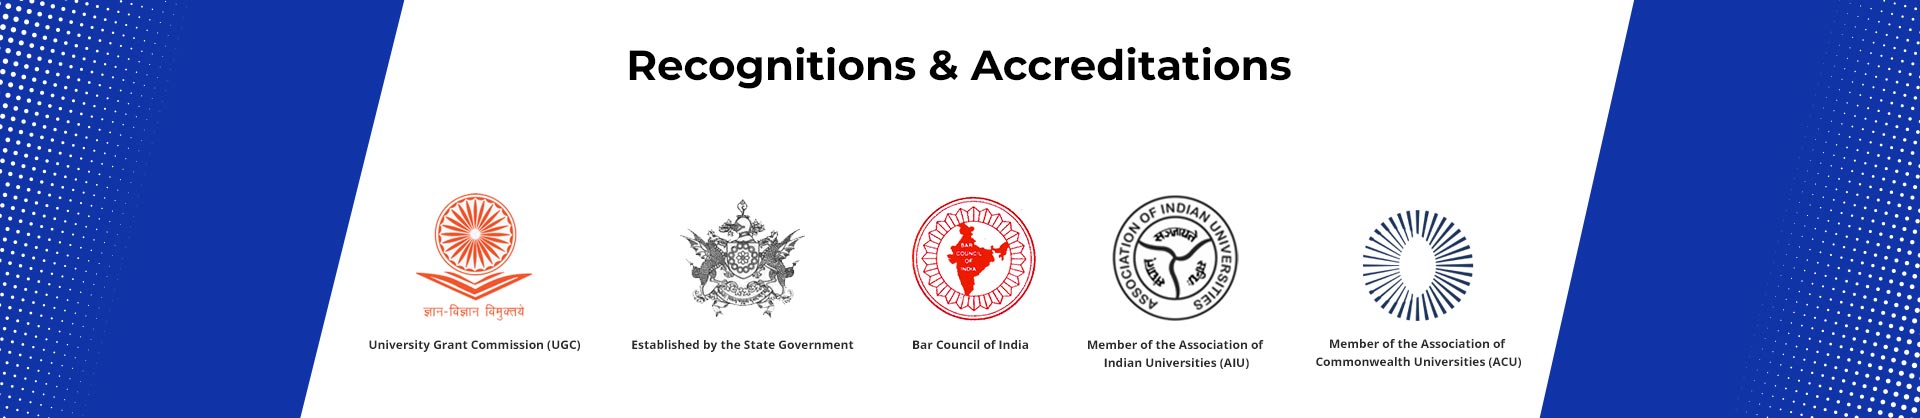 Recognitions_Accreditations